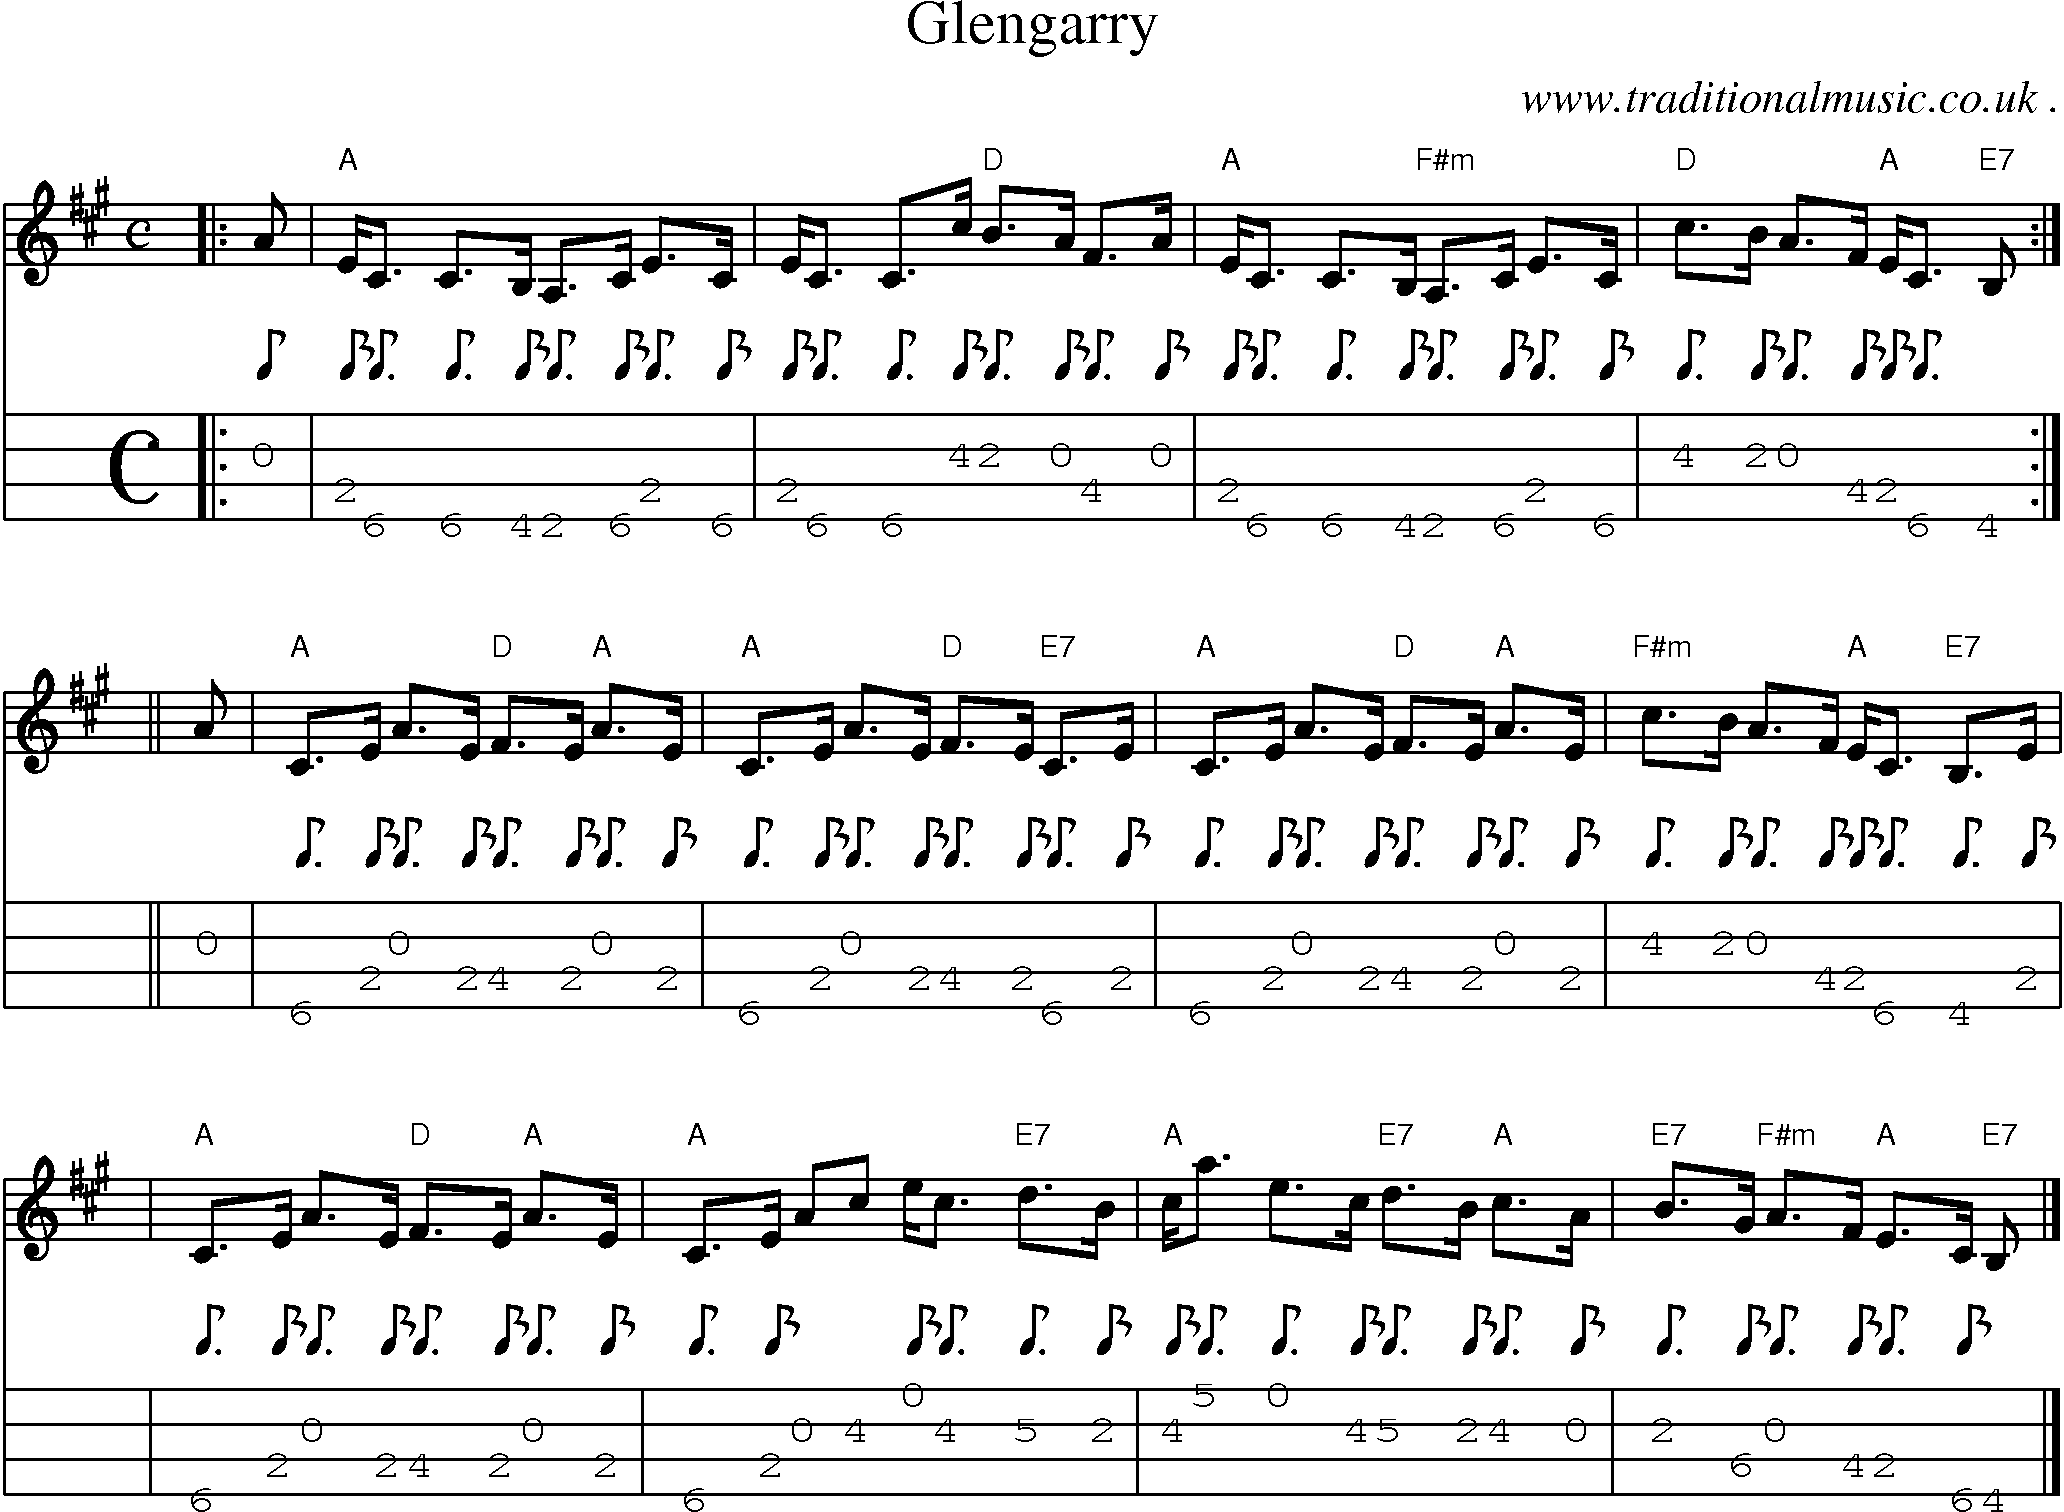 Sheet-music  score, Chords and Mandolin Tabs for Glengarry